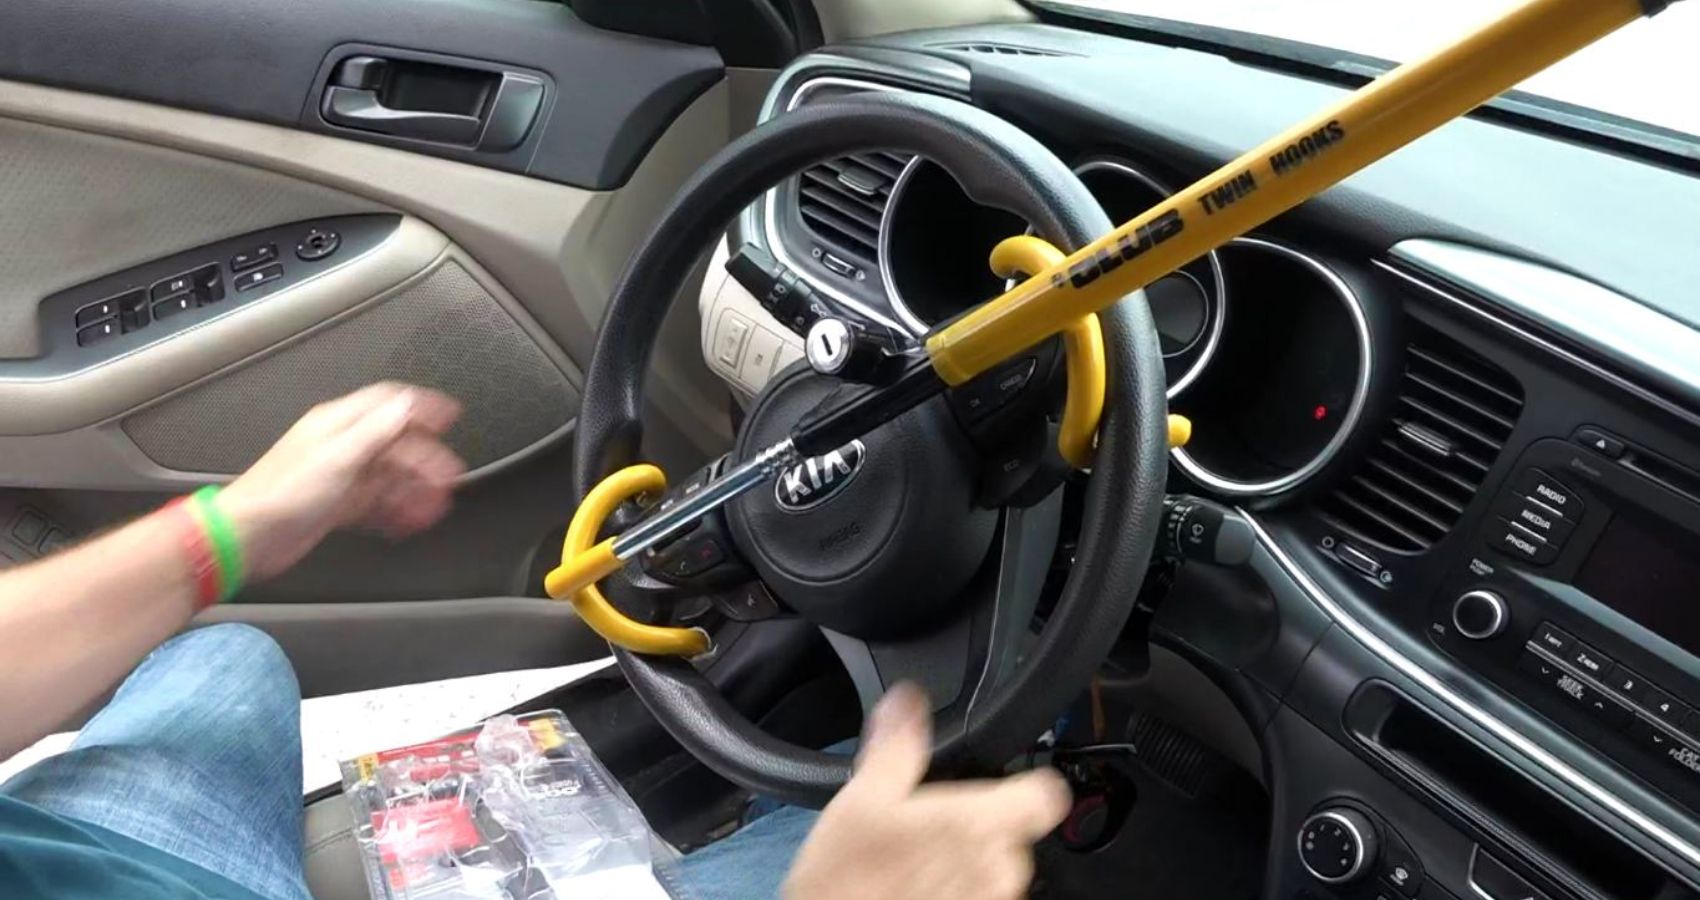 Drive a Newer Hyundai or Kia? A Steering Wheel Lock Could Keep It From  Getting Stolen